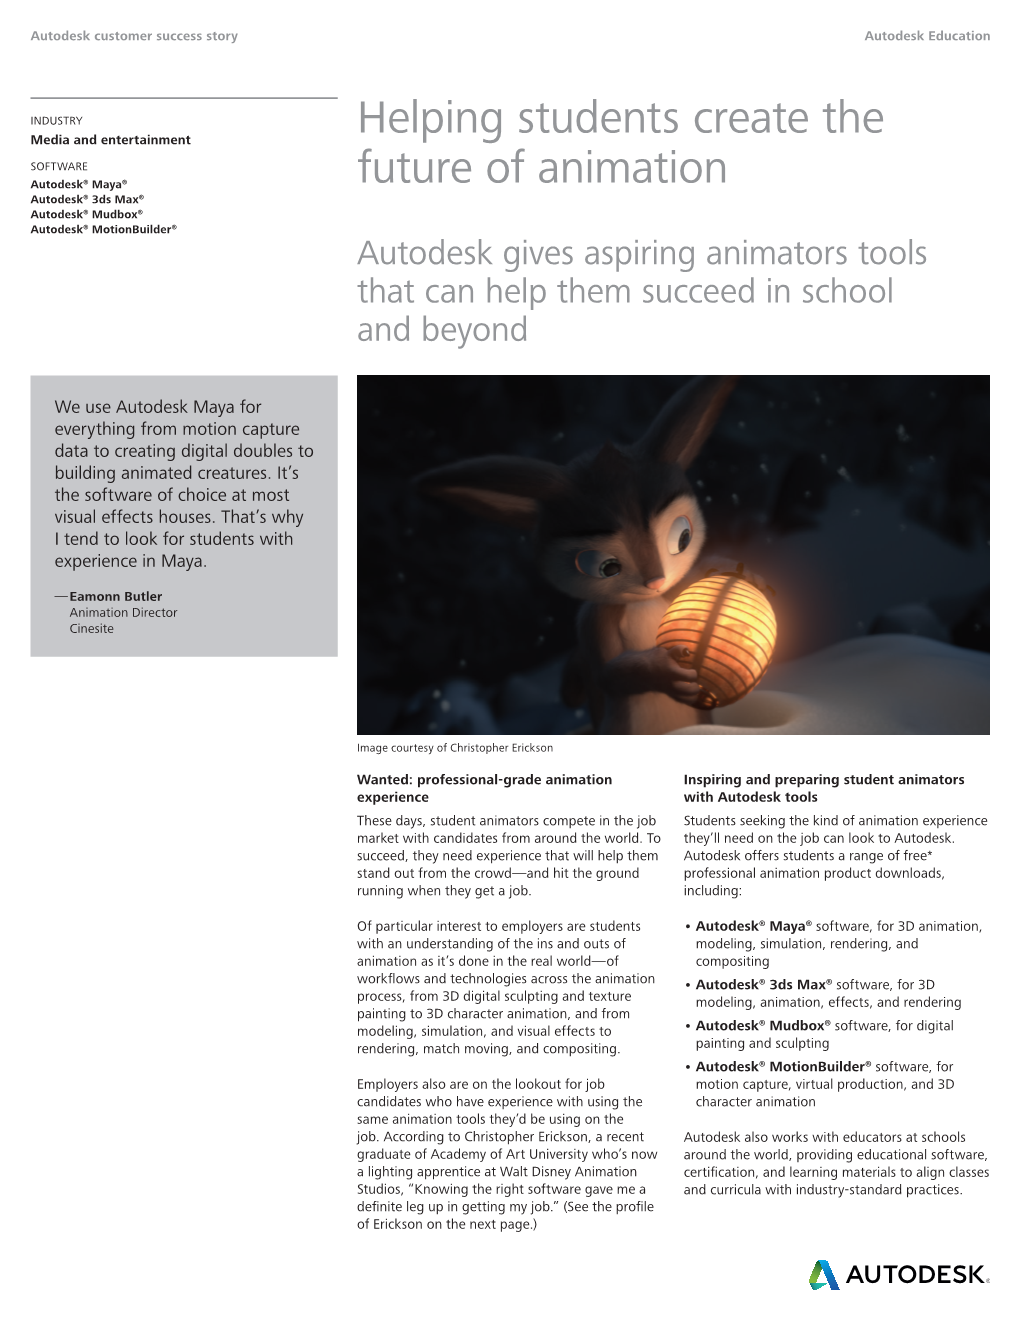 Helping Students Create the Future of Animation